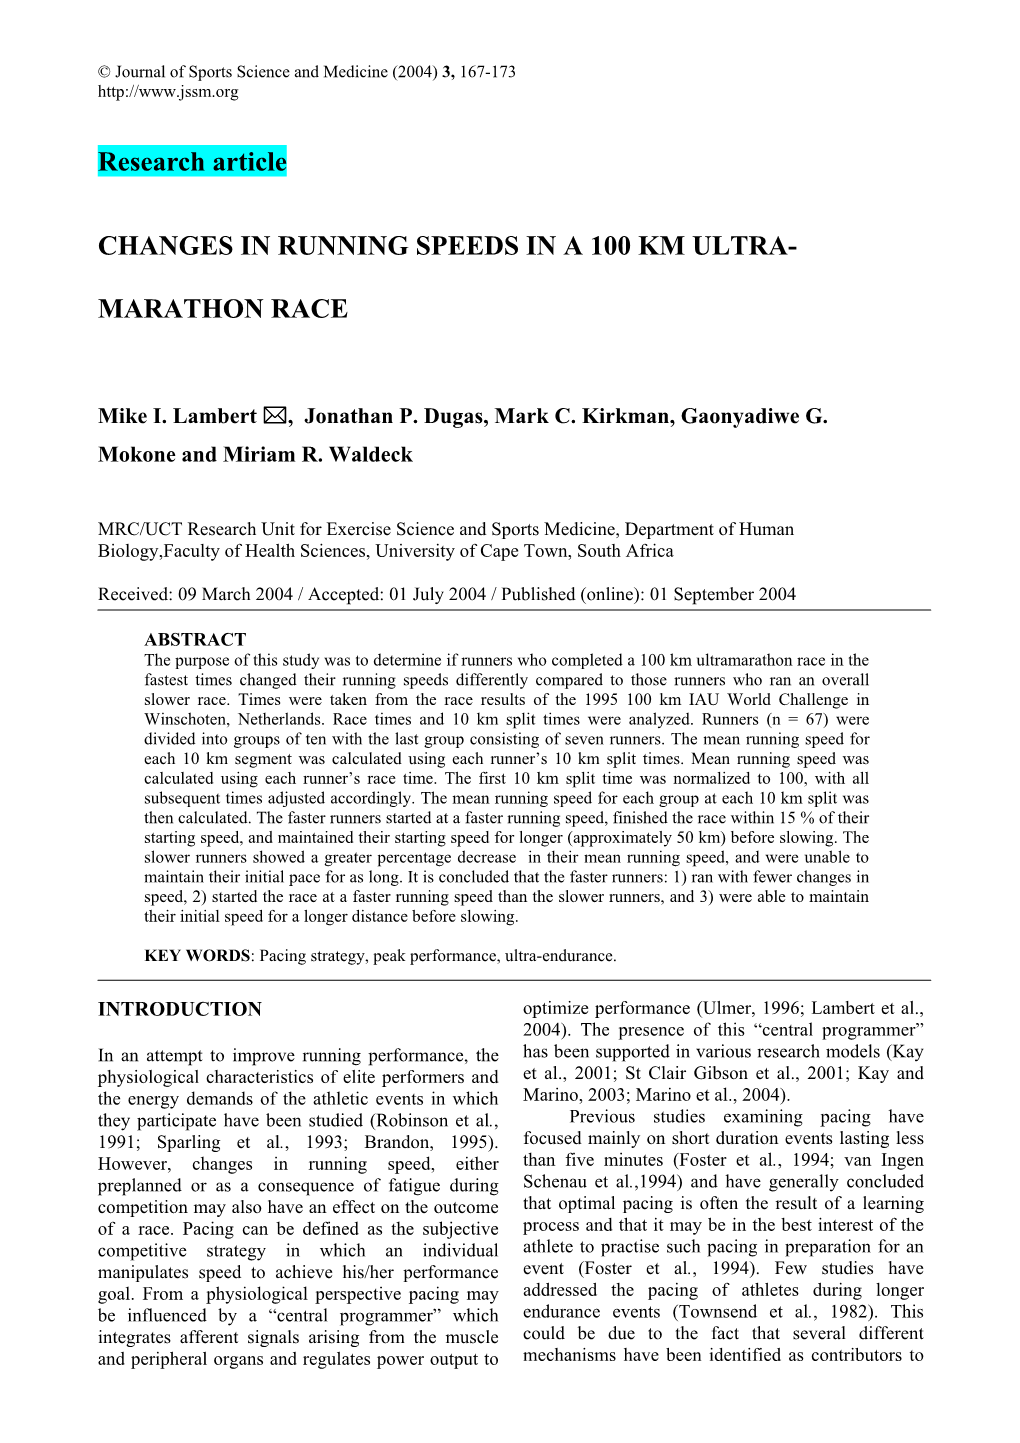 Research Article CHANGES in RUNNING SPEEDS in a 100 KM